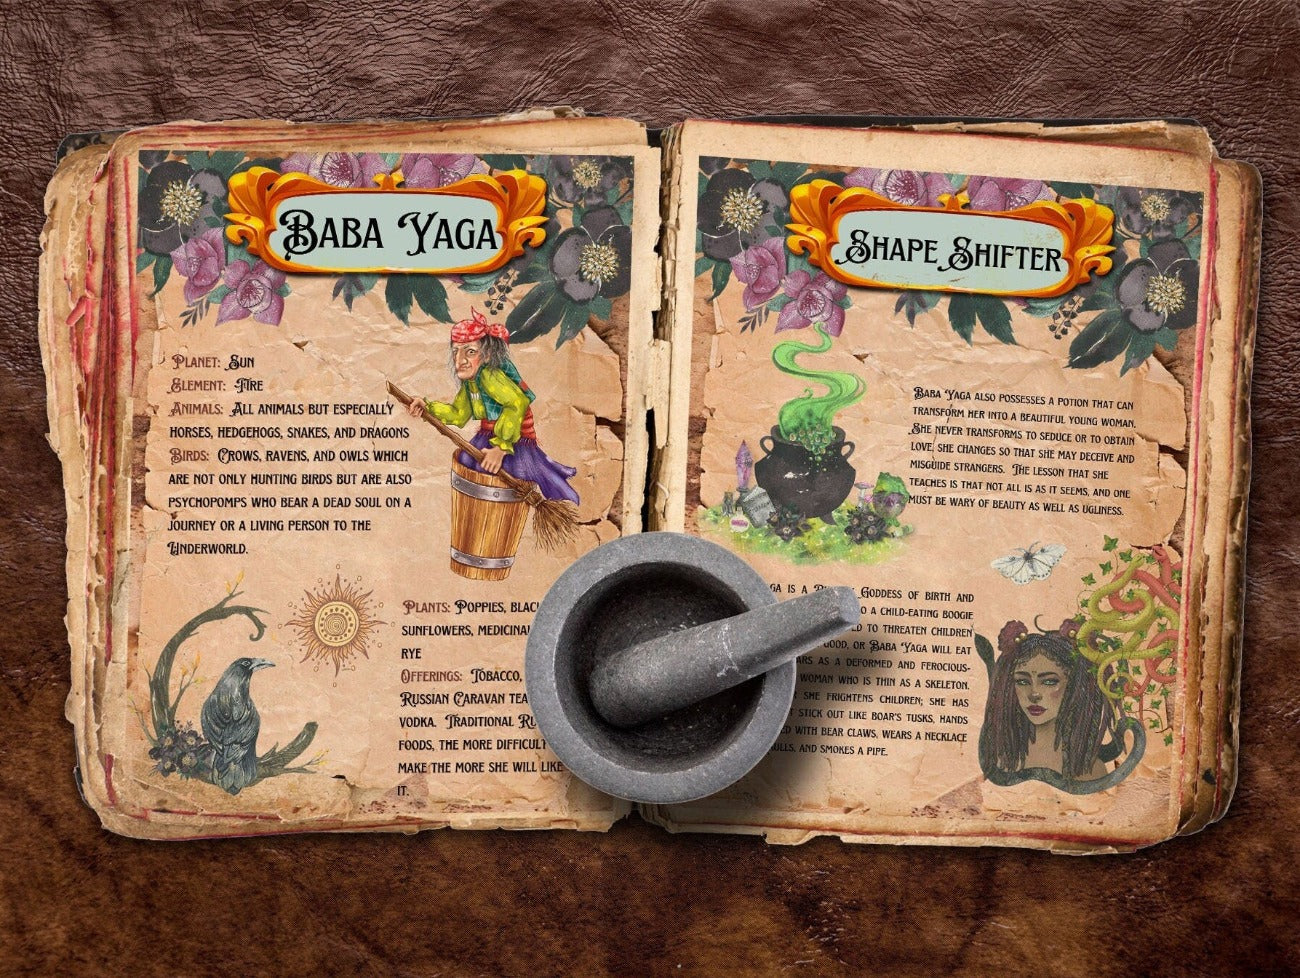 BABA YAGA first two pages are displayed in an open witchcraft book - Morgana Magick Spell